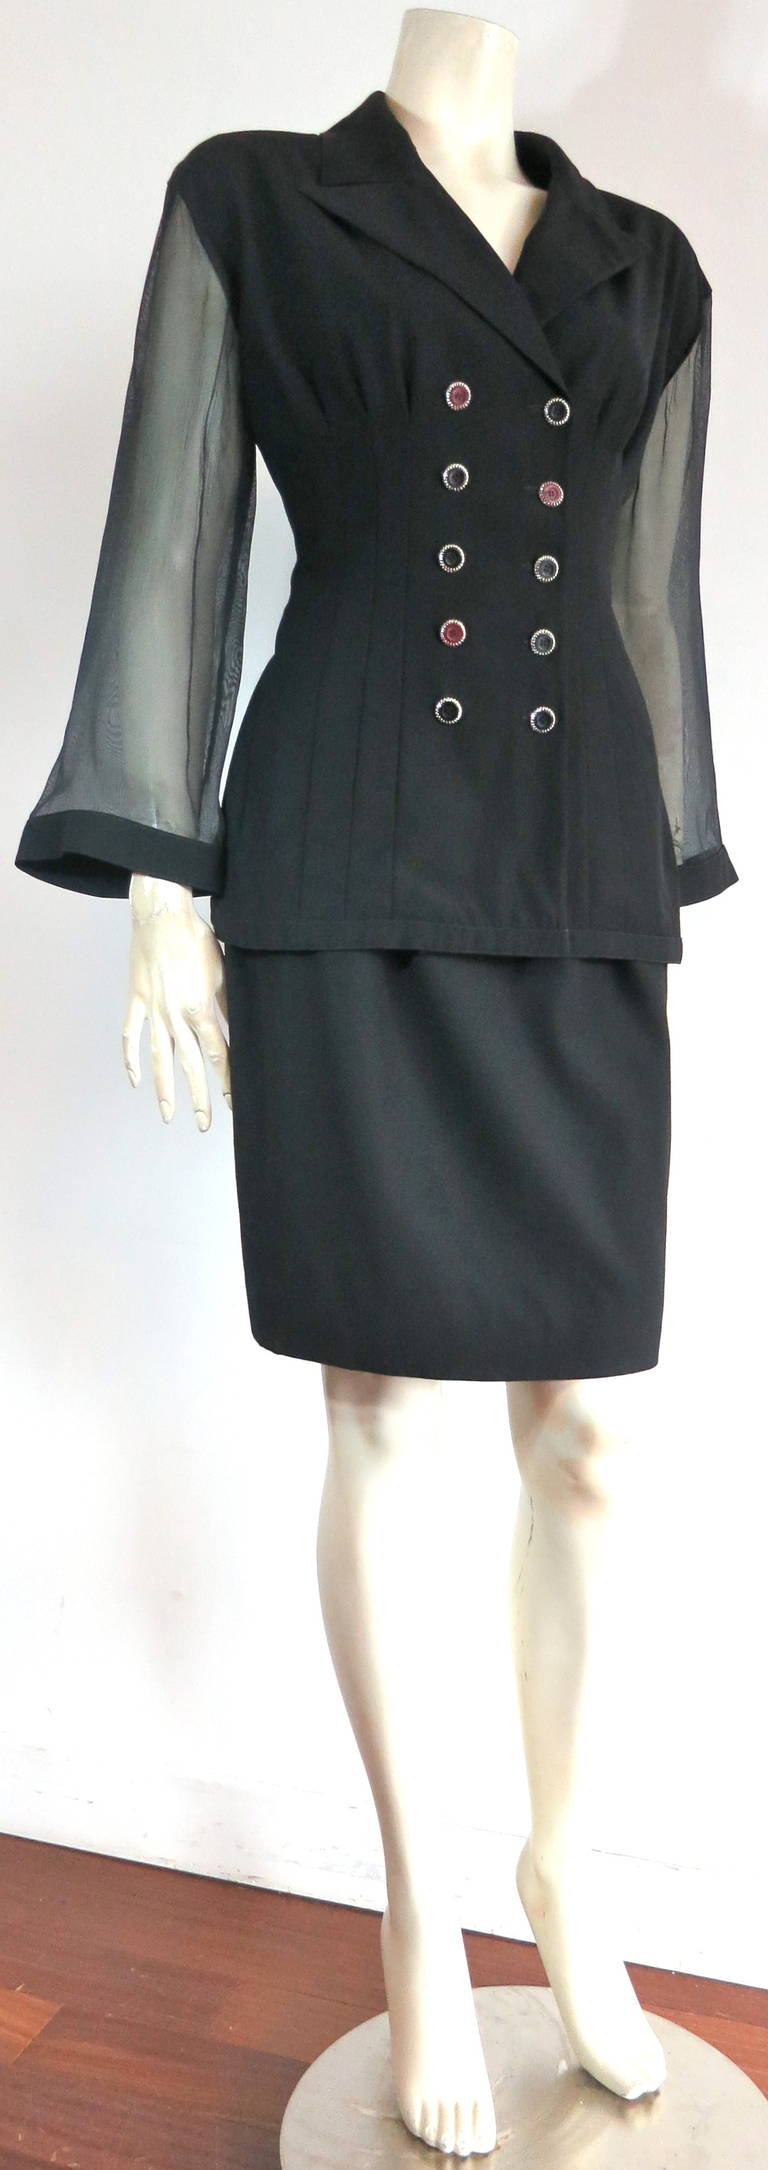 Mint condition 1980's KARL LAGERFELD black skirt suit with sheer sleeves.

Made in France, as labeled.

Gorgeous black wool, two piece skirt suit. 

The jacket features four, vertical pleat-style seams at both front panels with ten button